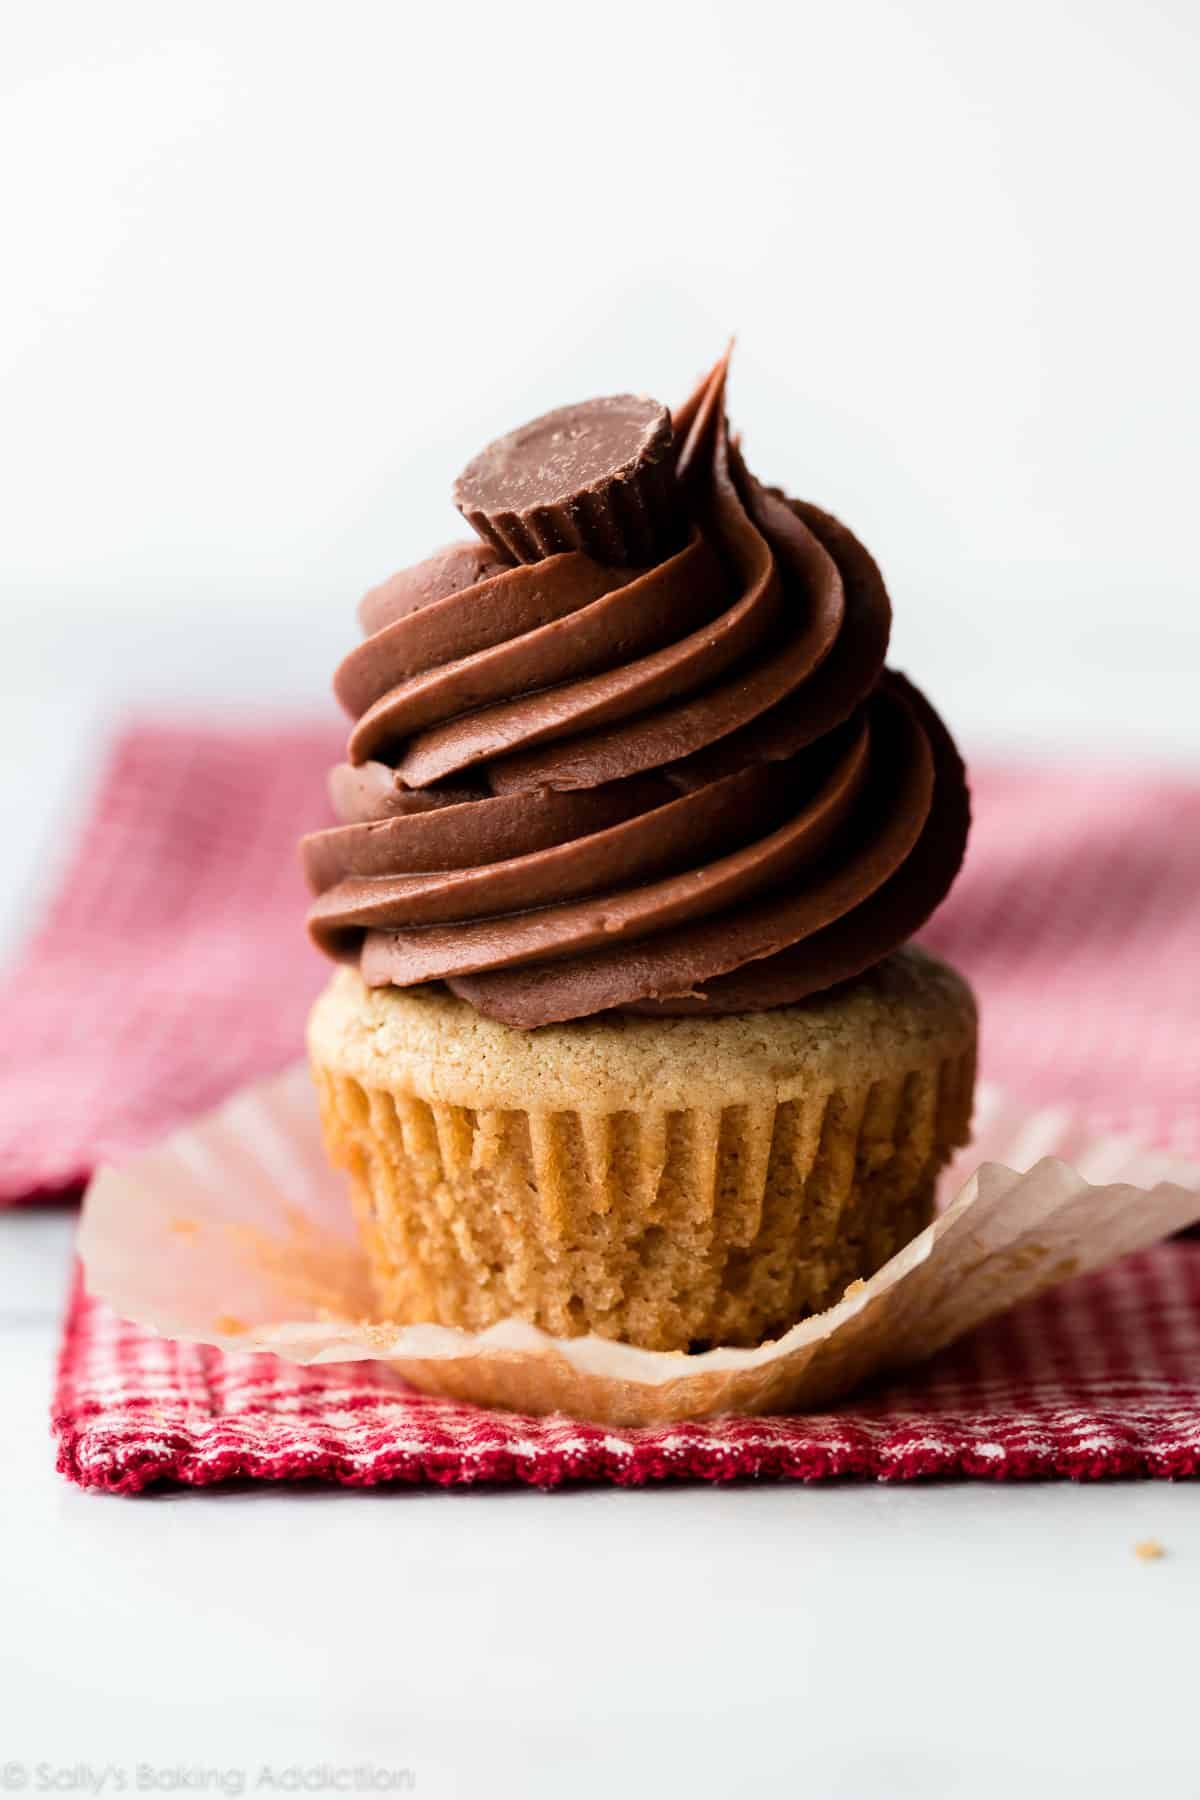 Mouth-watering peanut butter cupcake on a red tablecloth.